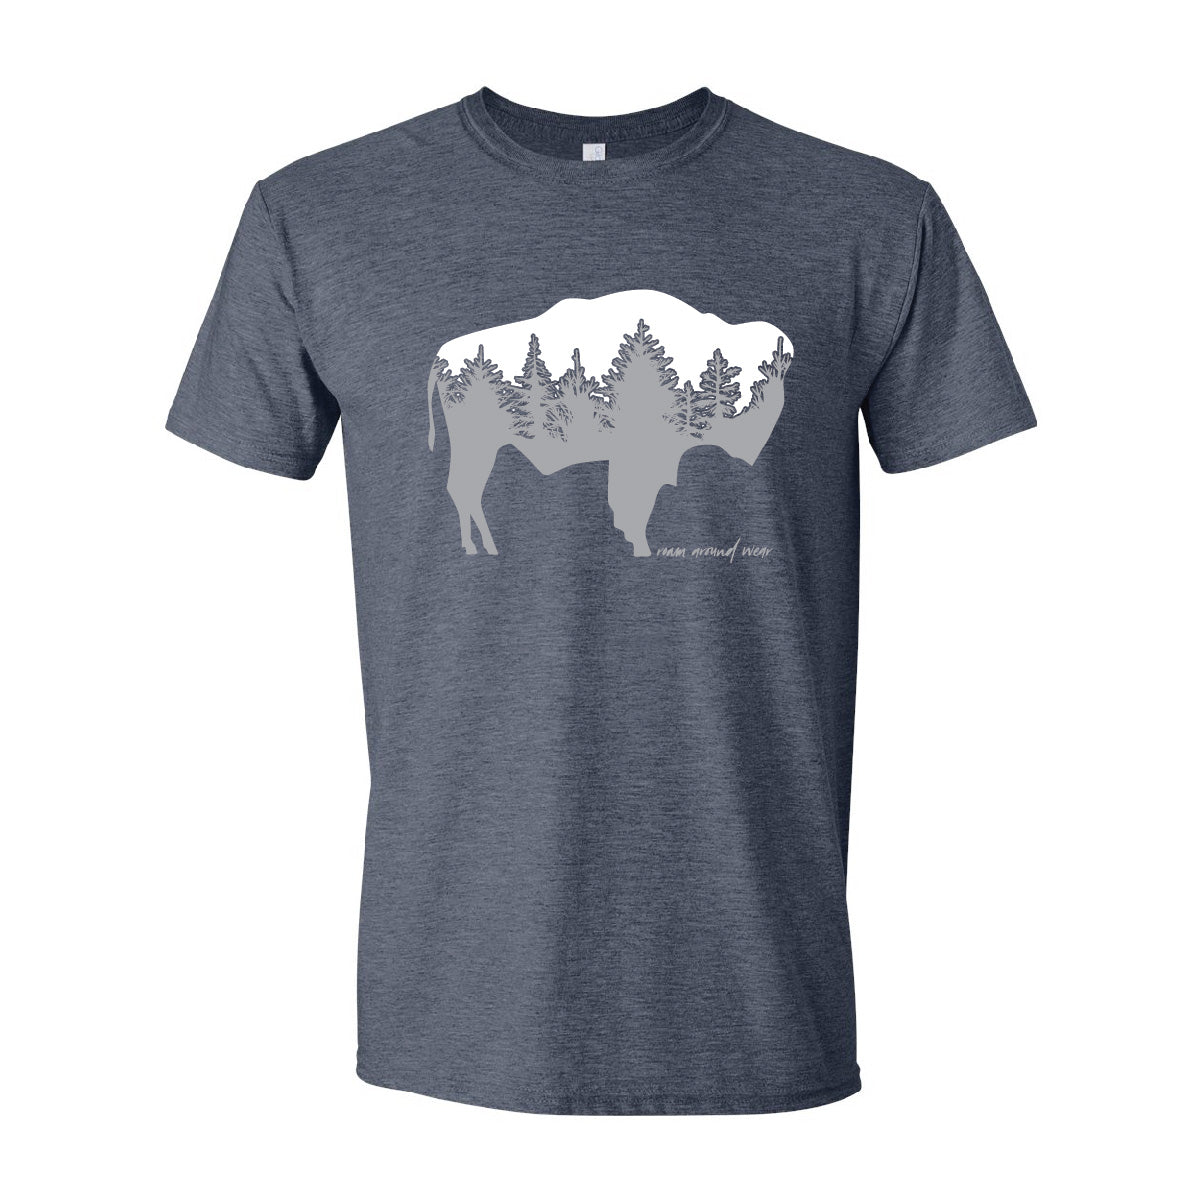 Bison forest unisex tee. Navy wyoming tee. Roam Around Wear is a Wyoming t-shirt company based in Gillette, Wyoming